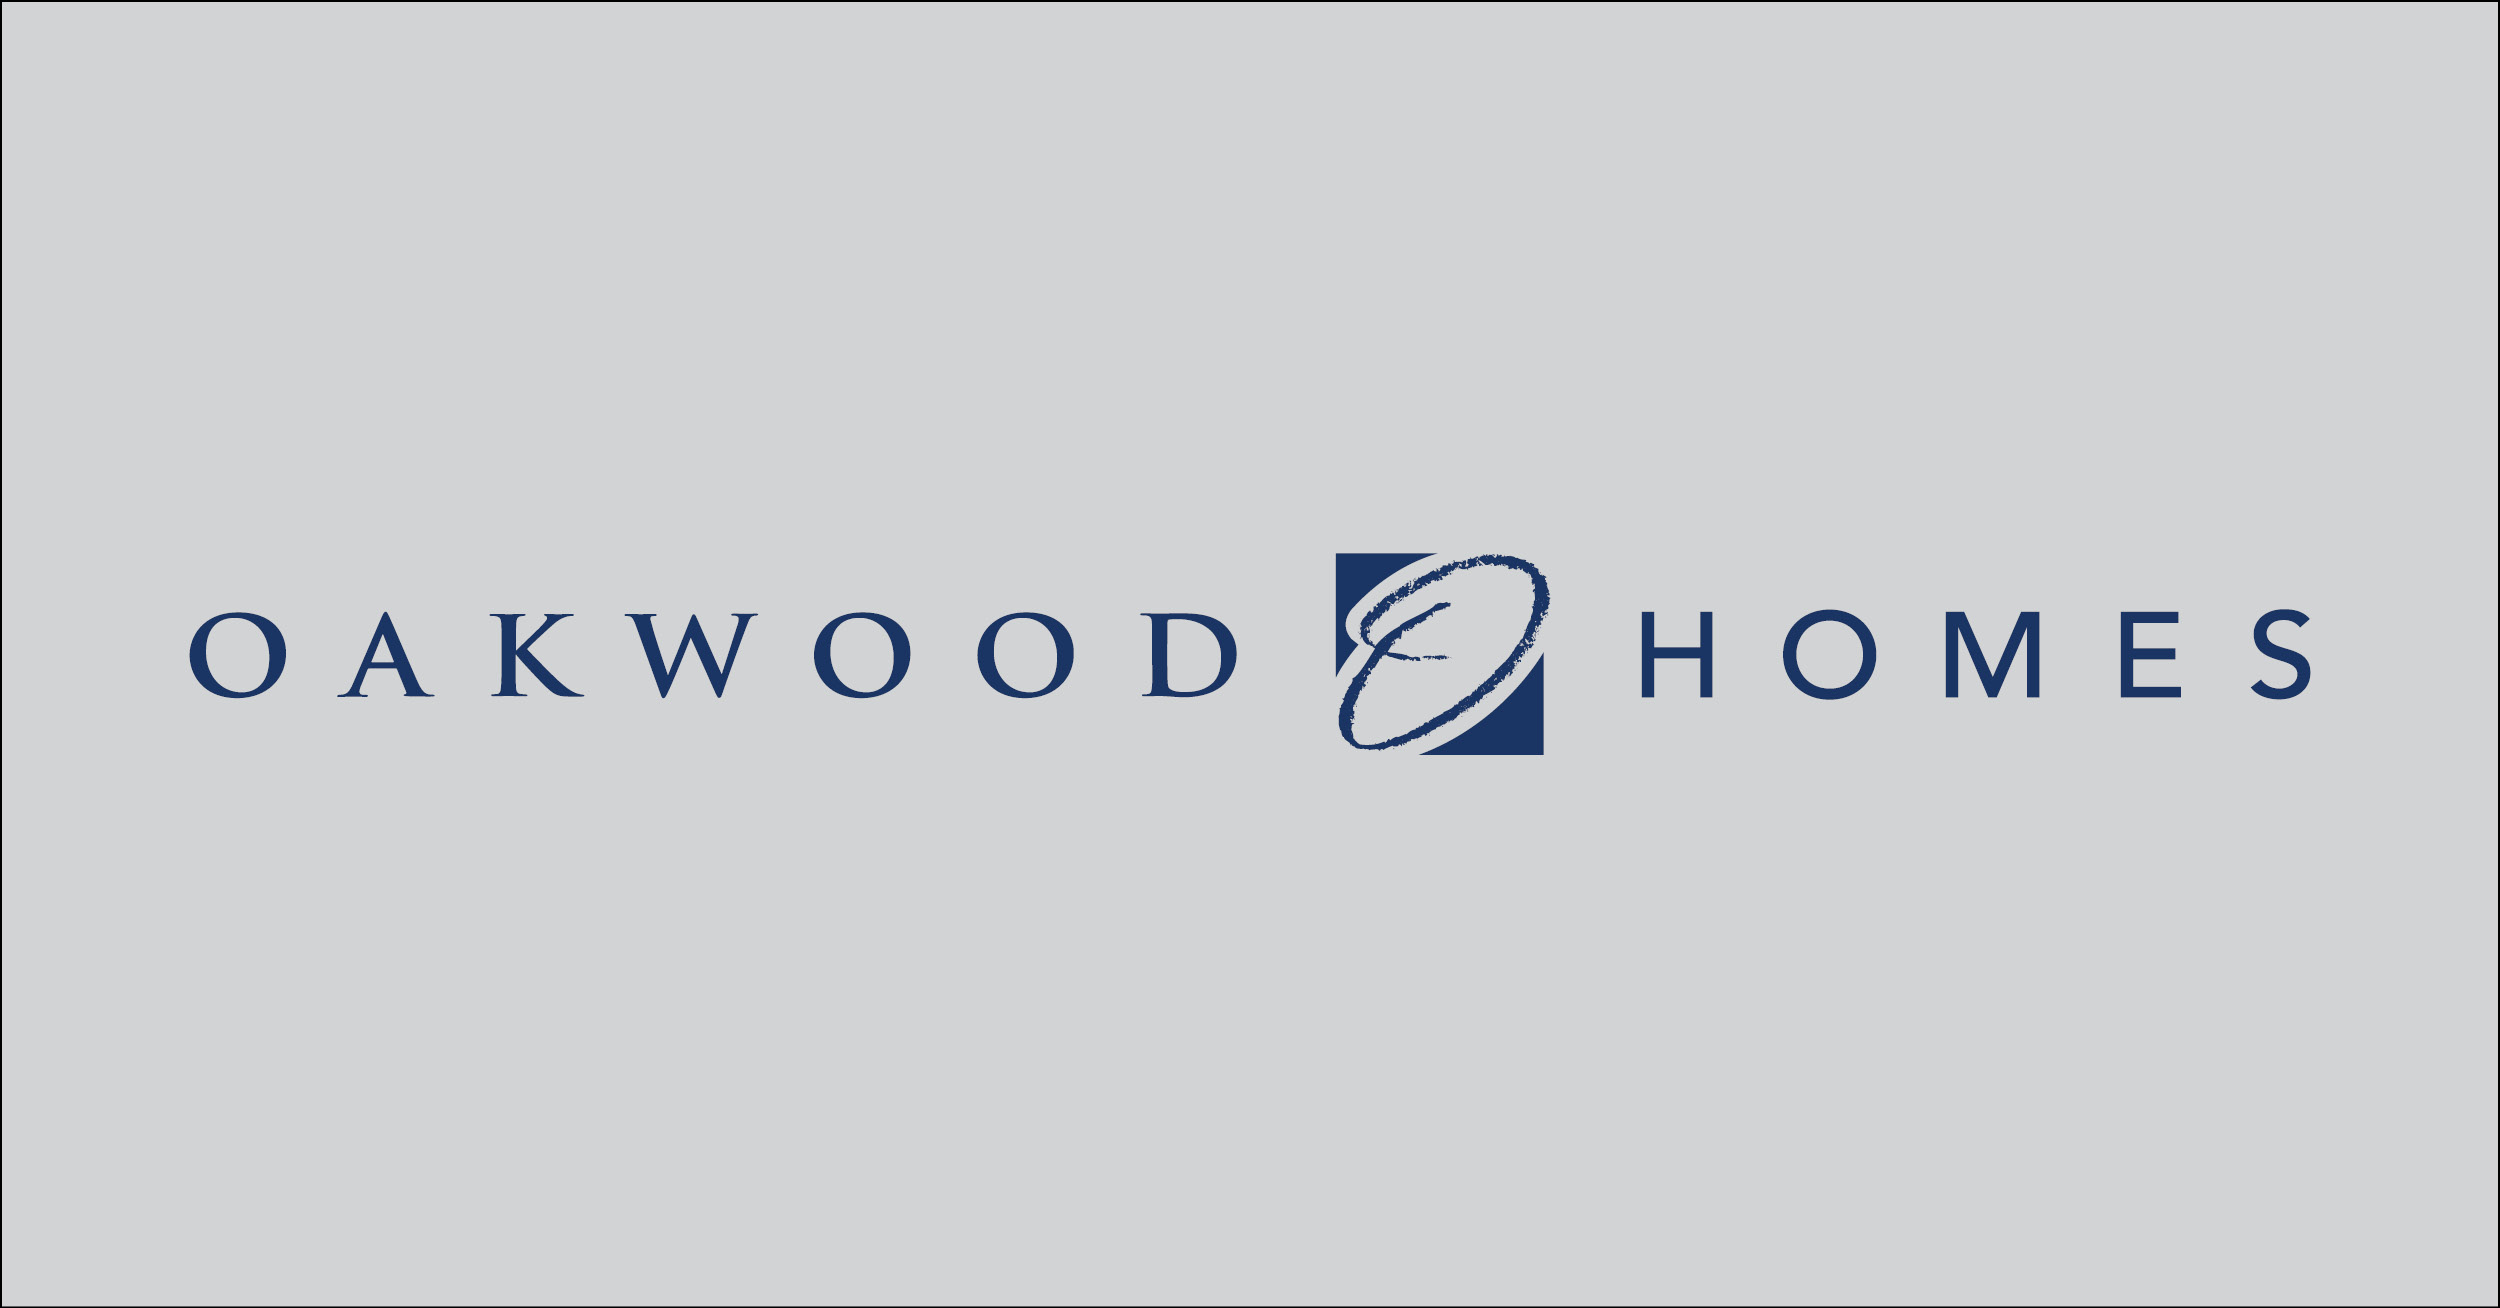 Find new construction or search for new homes and communities by Oakwood Homes in Colorado